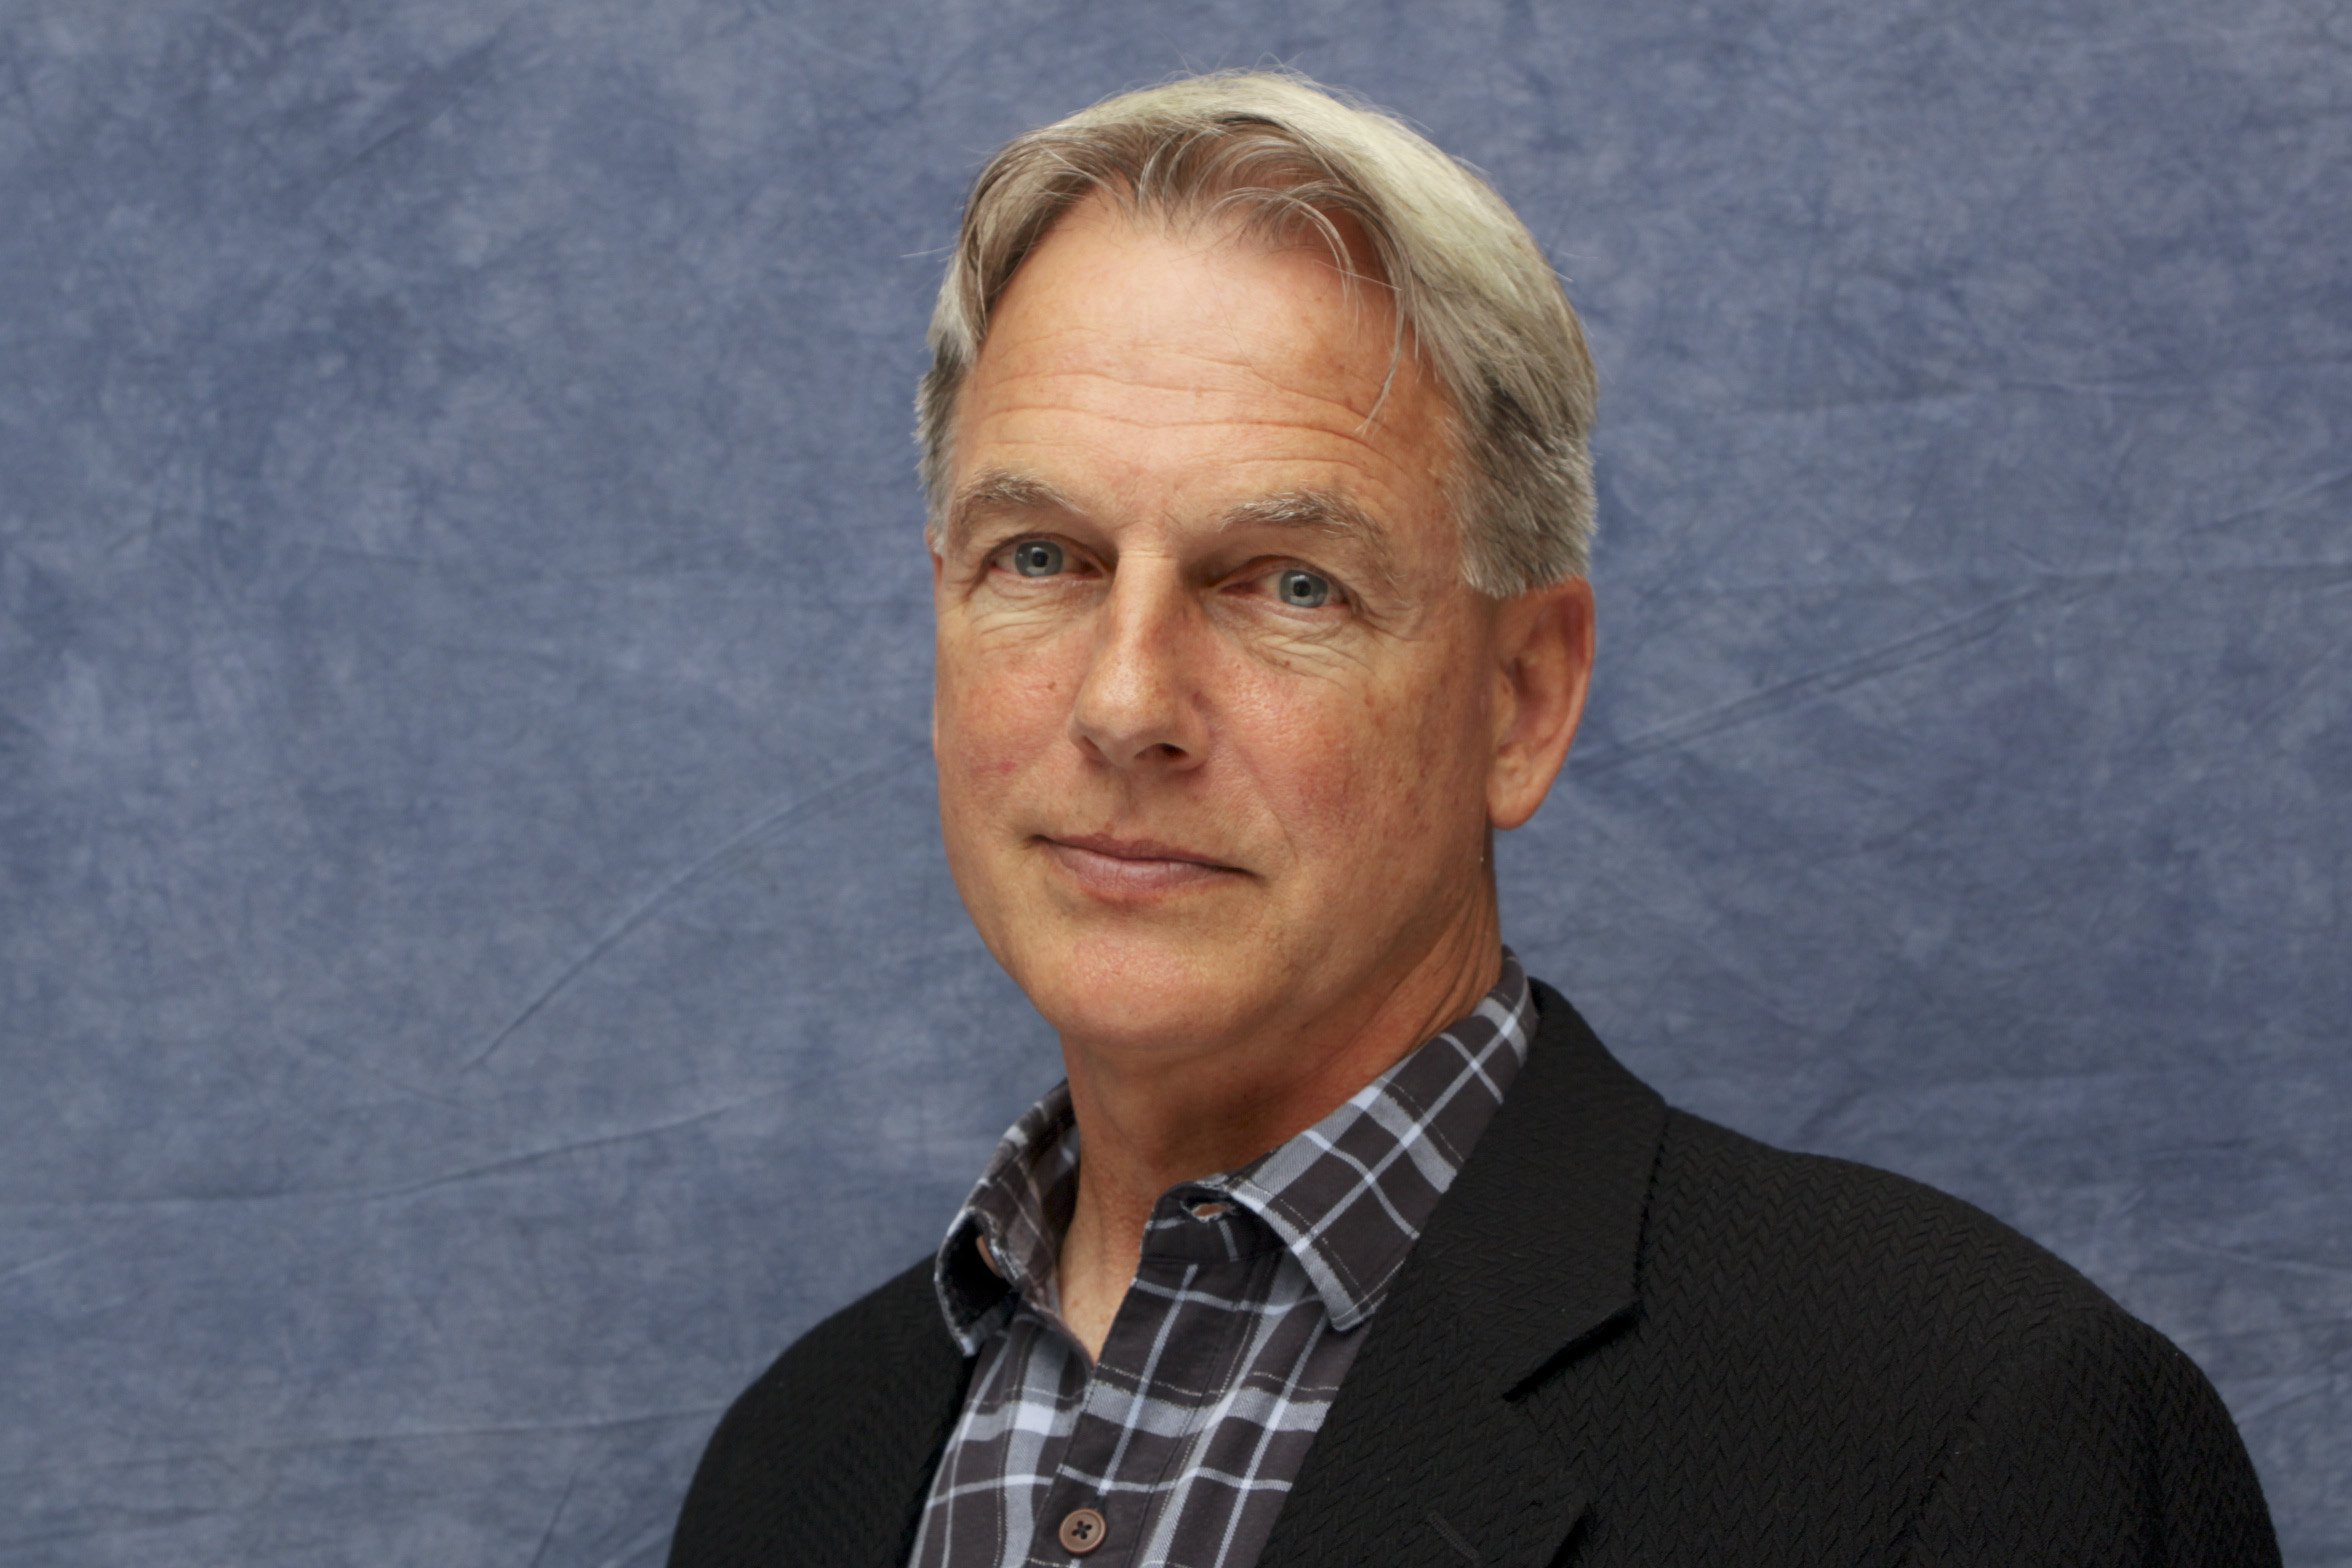 Mark Harmon at the Four Seasons Hotel in Beverly Hills, California on April 22, 2009. | Source: Getty Images